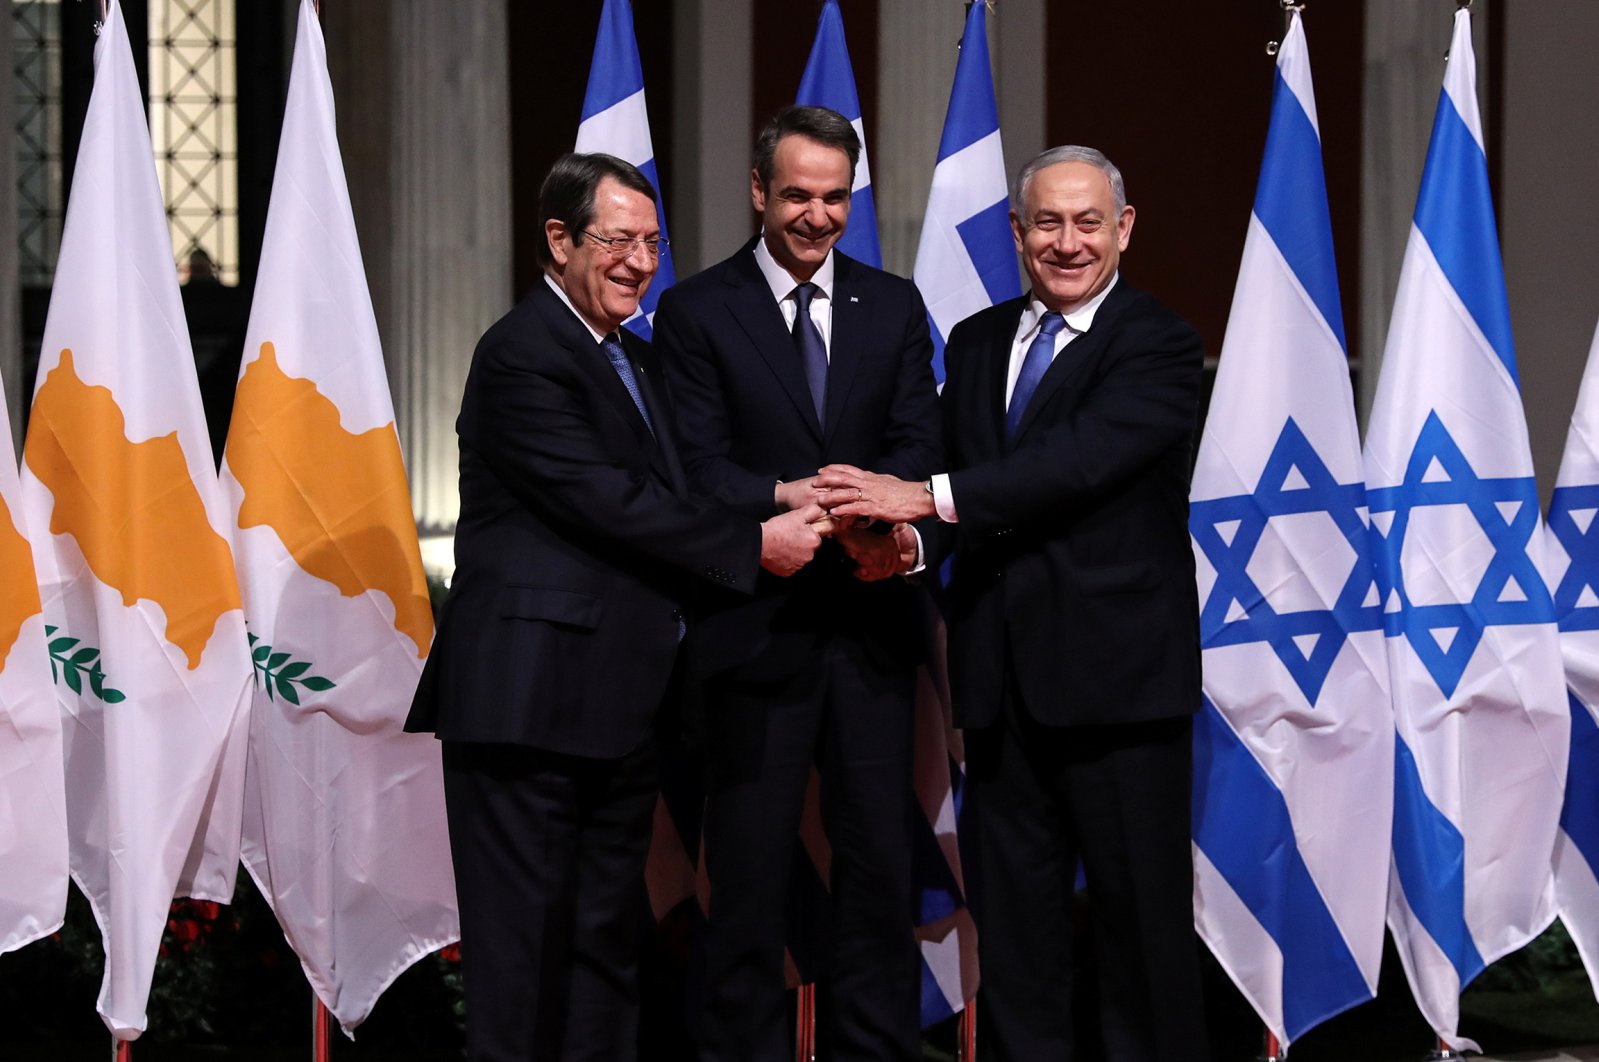 Greek Cypriot leader Nicos Anastasiades, Greek Prime Minister Kyriakos Mitsotakis and Israeli Prime Minister Benjamin Netanyahu pose for a photo before signing a deal to build the EastMed subsea pipeline to carry natural gas from the Eastern Mediterranean to Europe, at the Zappeion Hall in Athens, Greece, Jan. 2, 2020. (Reuters Photo)